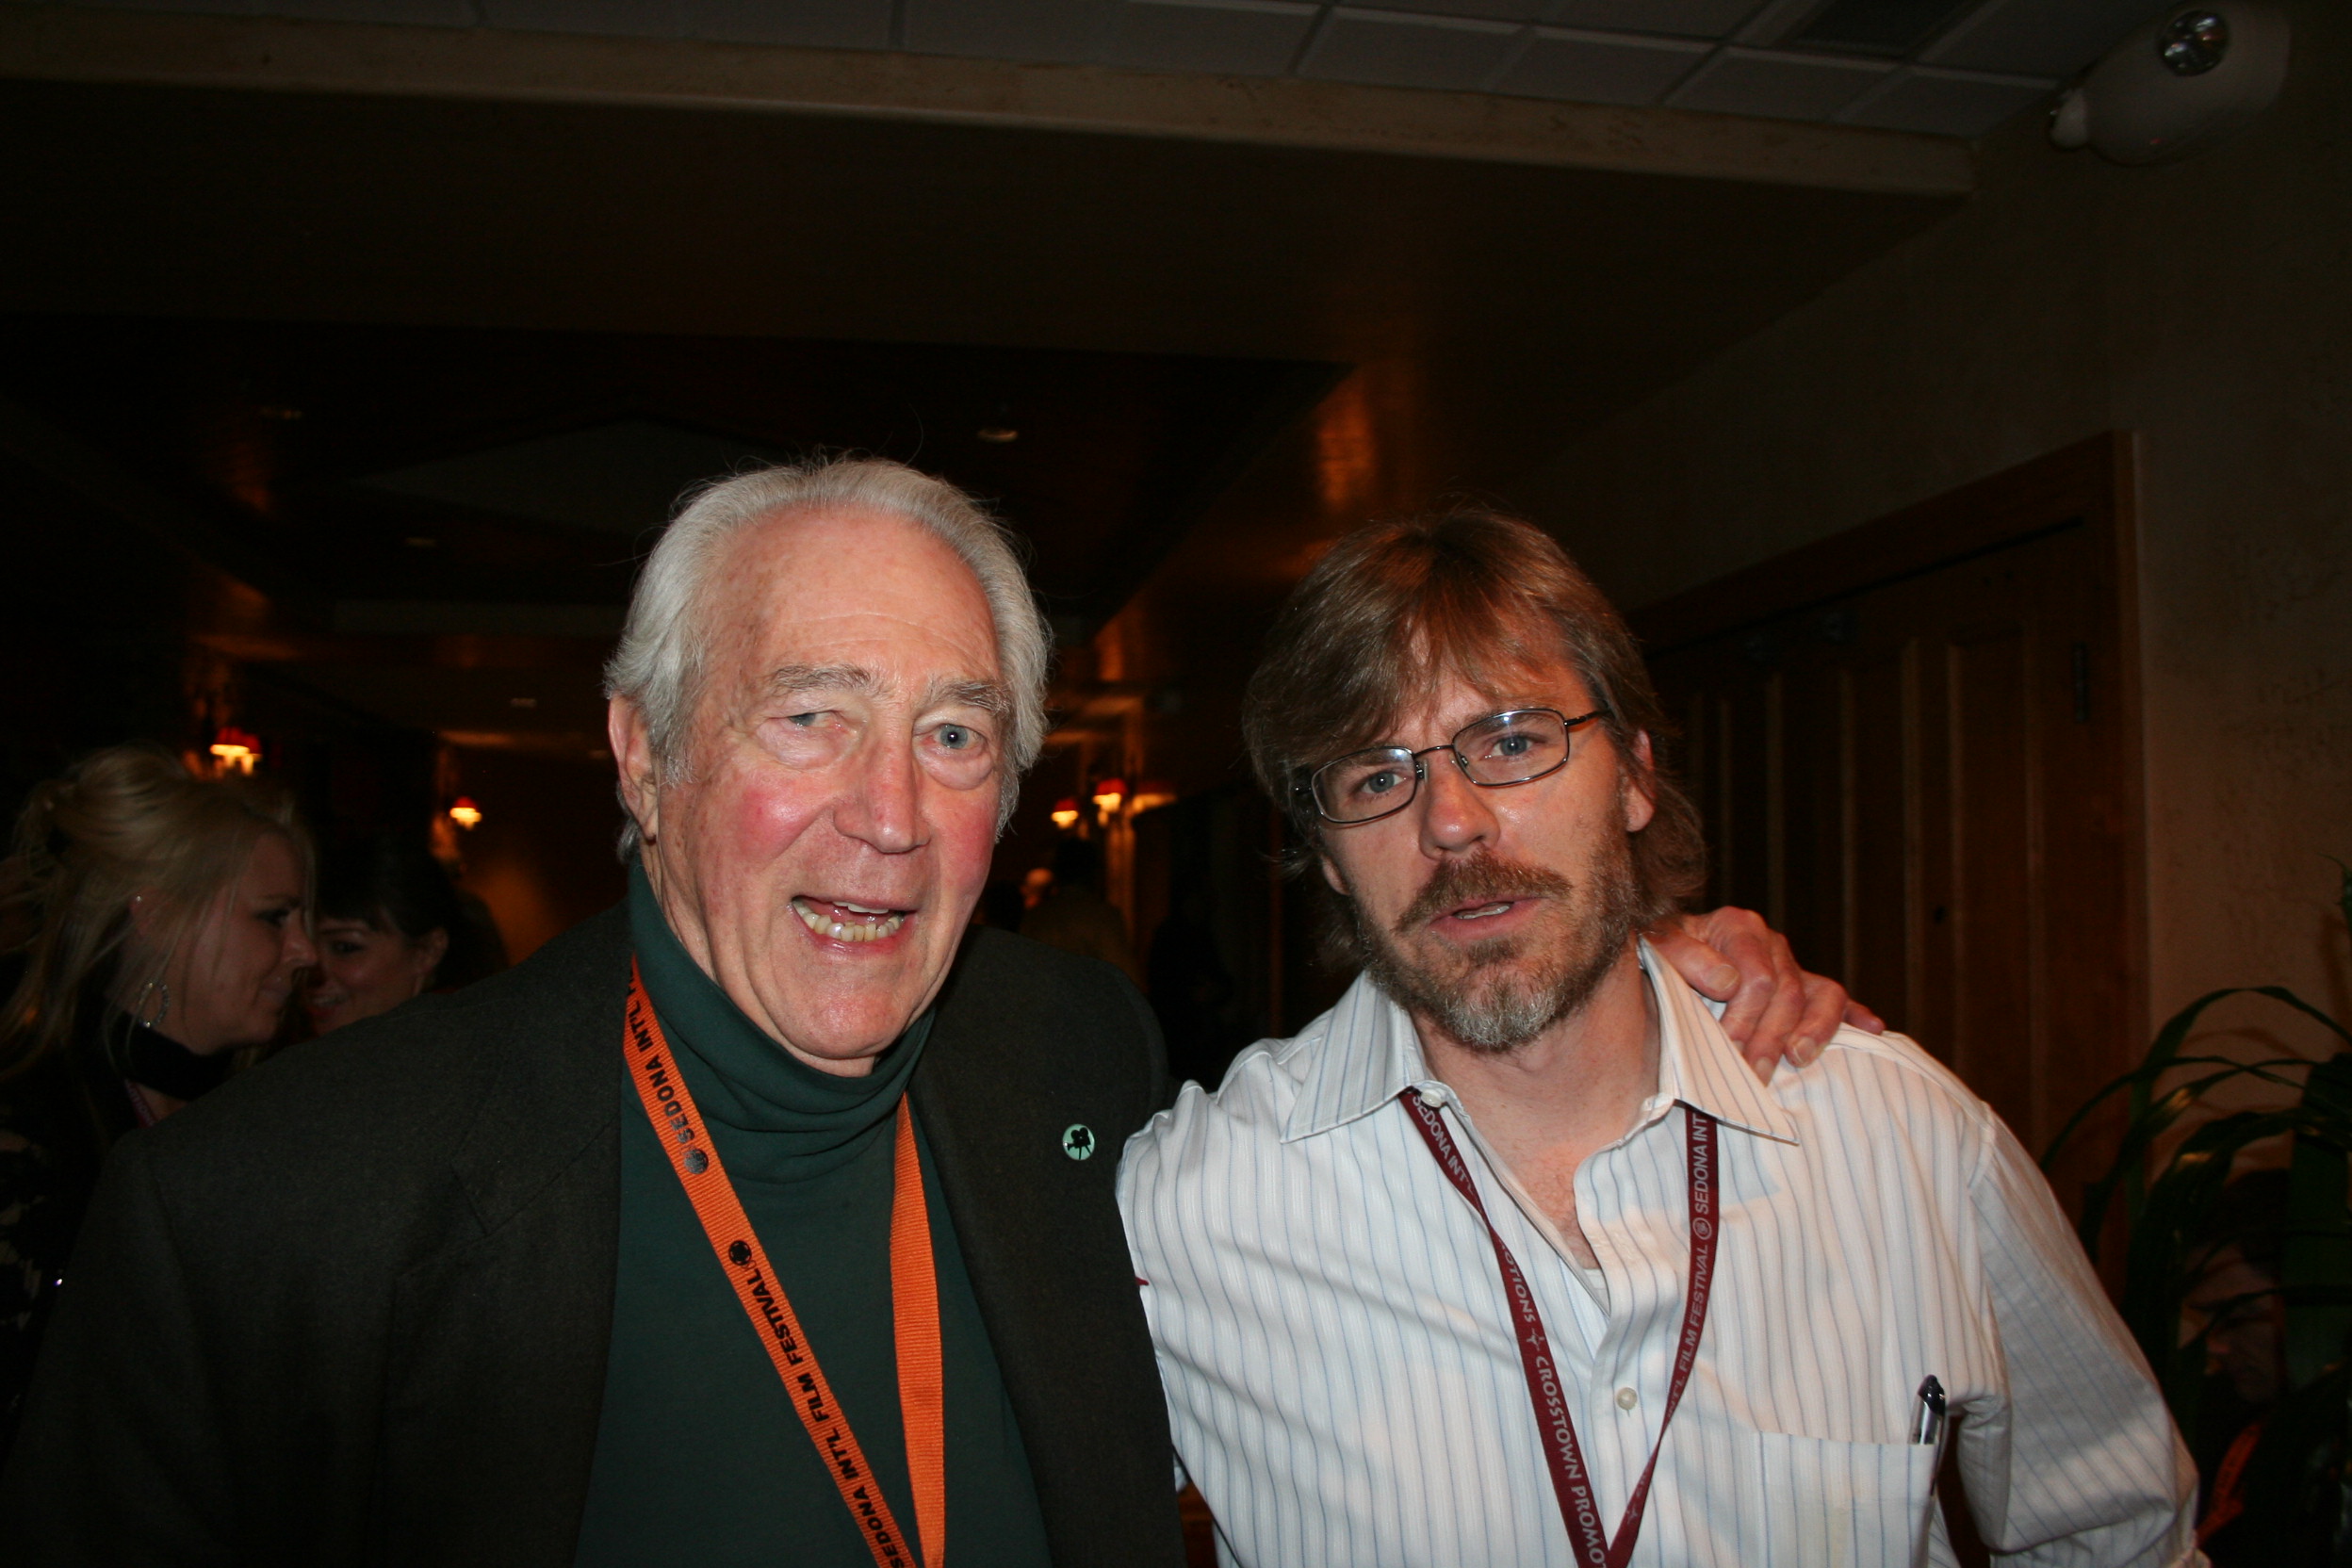 With the wonderful James Karen, who was happy to spout Return of the Living Dead lines to me!